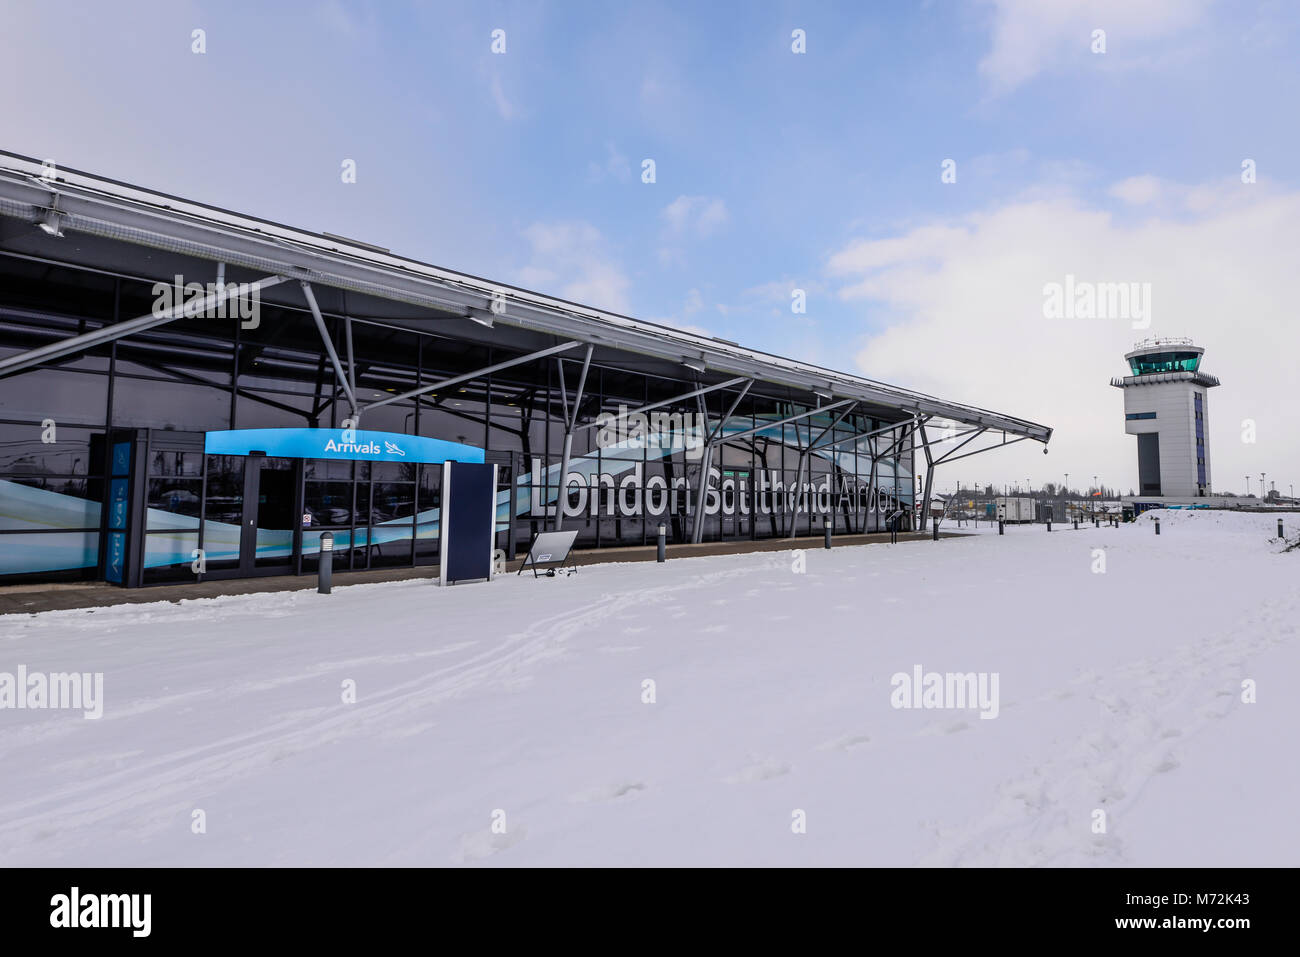 London Southend Airport terminal with snow on ground during beast from the east weather phenomenon. Most flights cancelled. Travel chaos Stock Photo